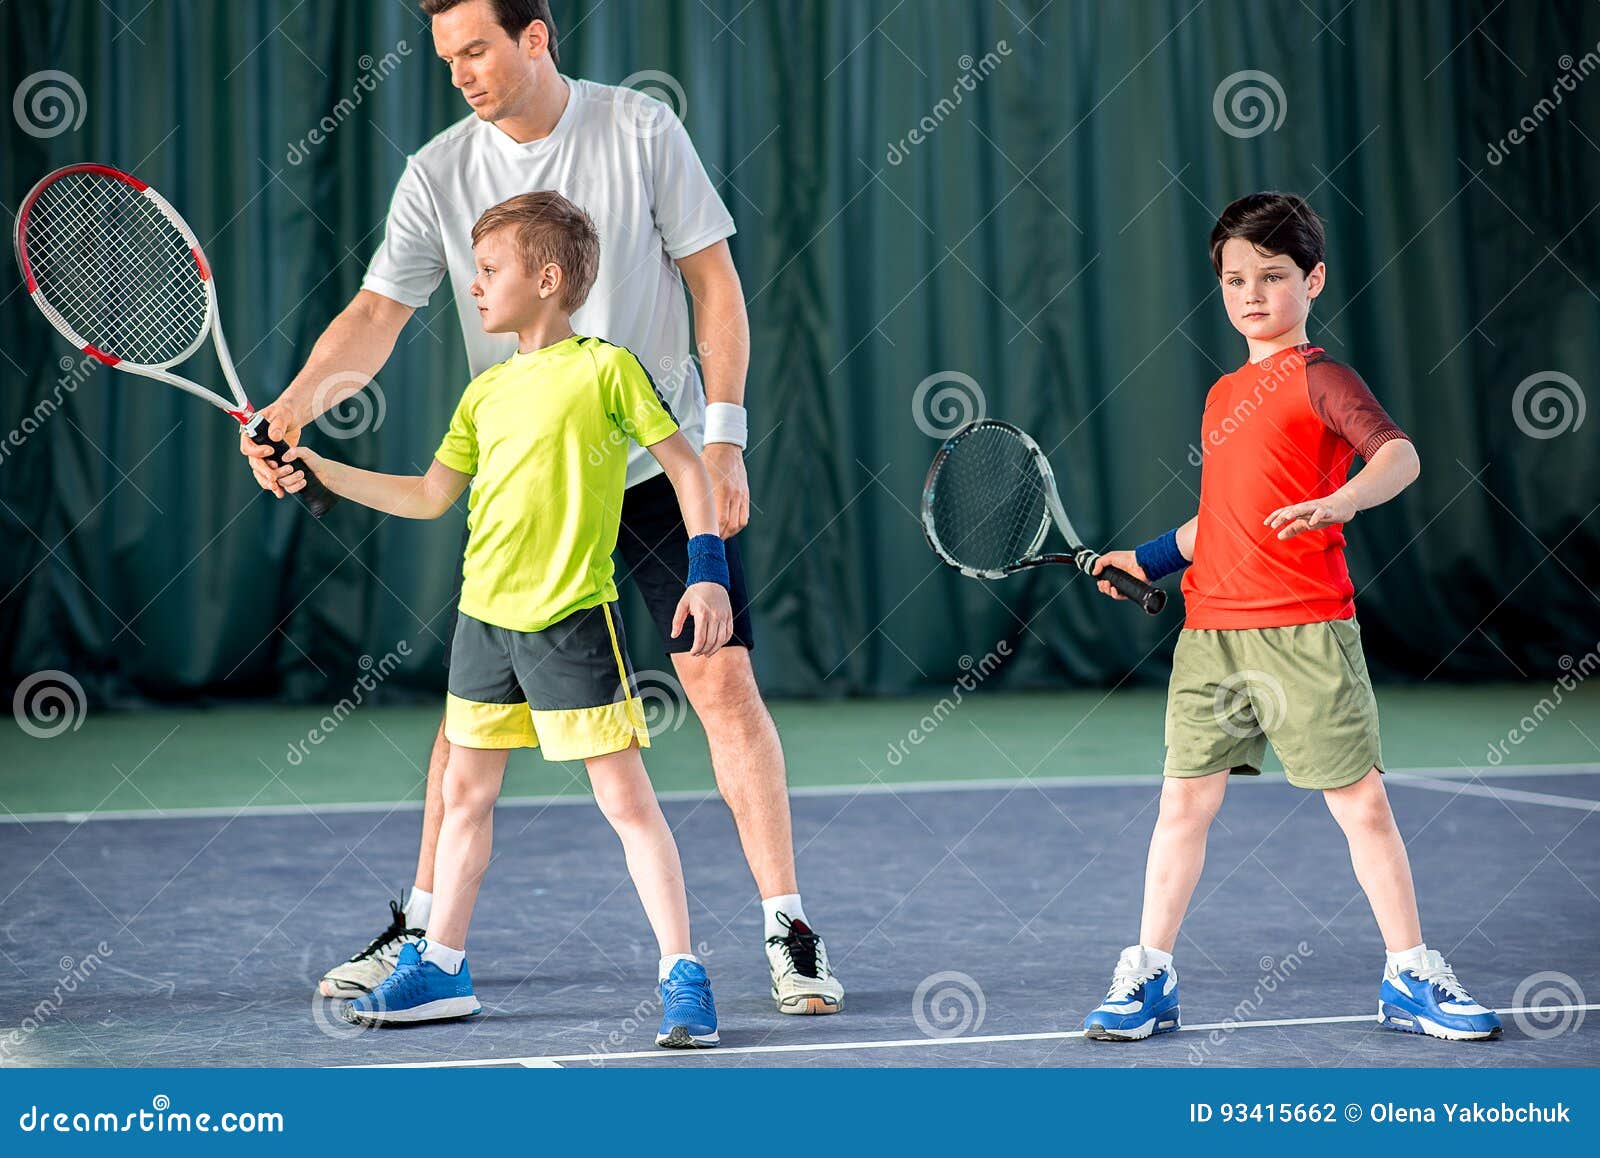 Concentrated Tennis Player Teaching Kids On Court Stock